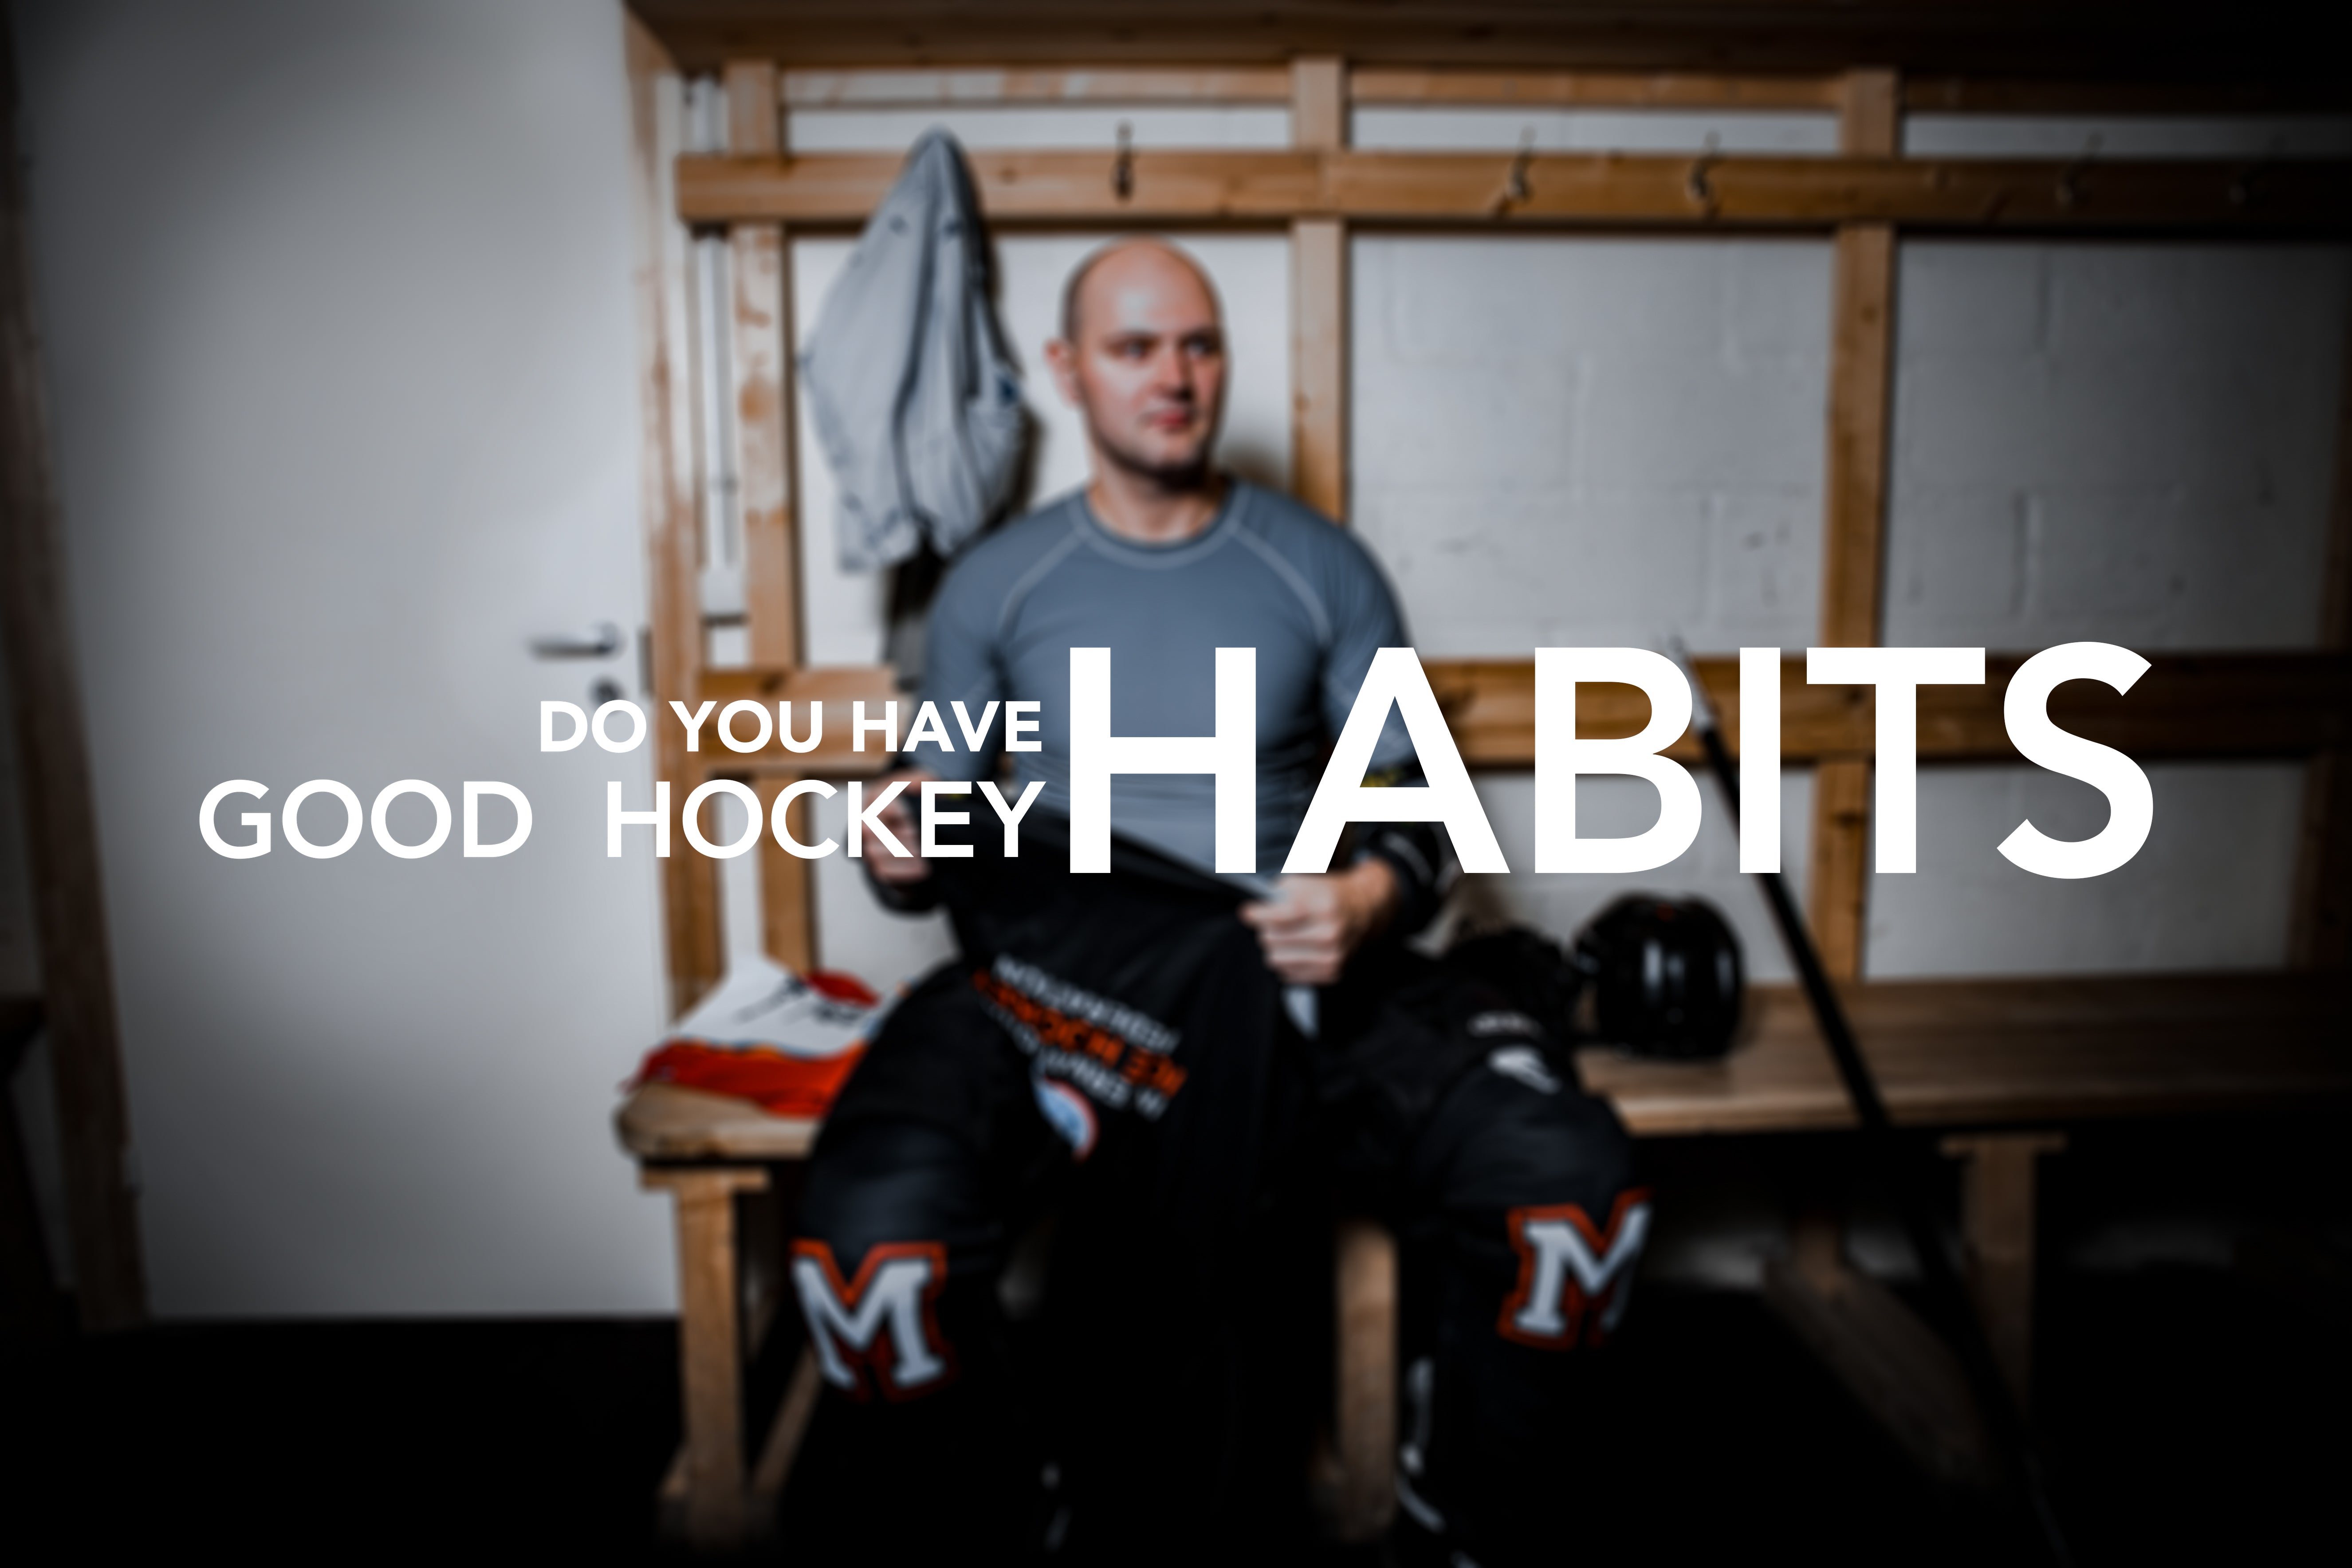 5 Habits That Will Make You A Better Player & Increase Your Overall Success